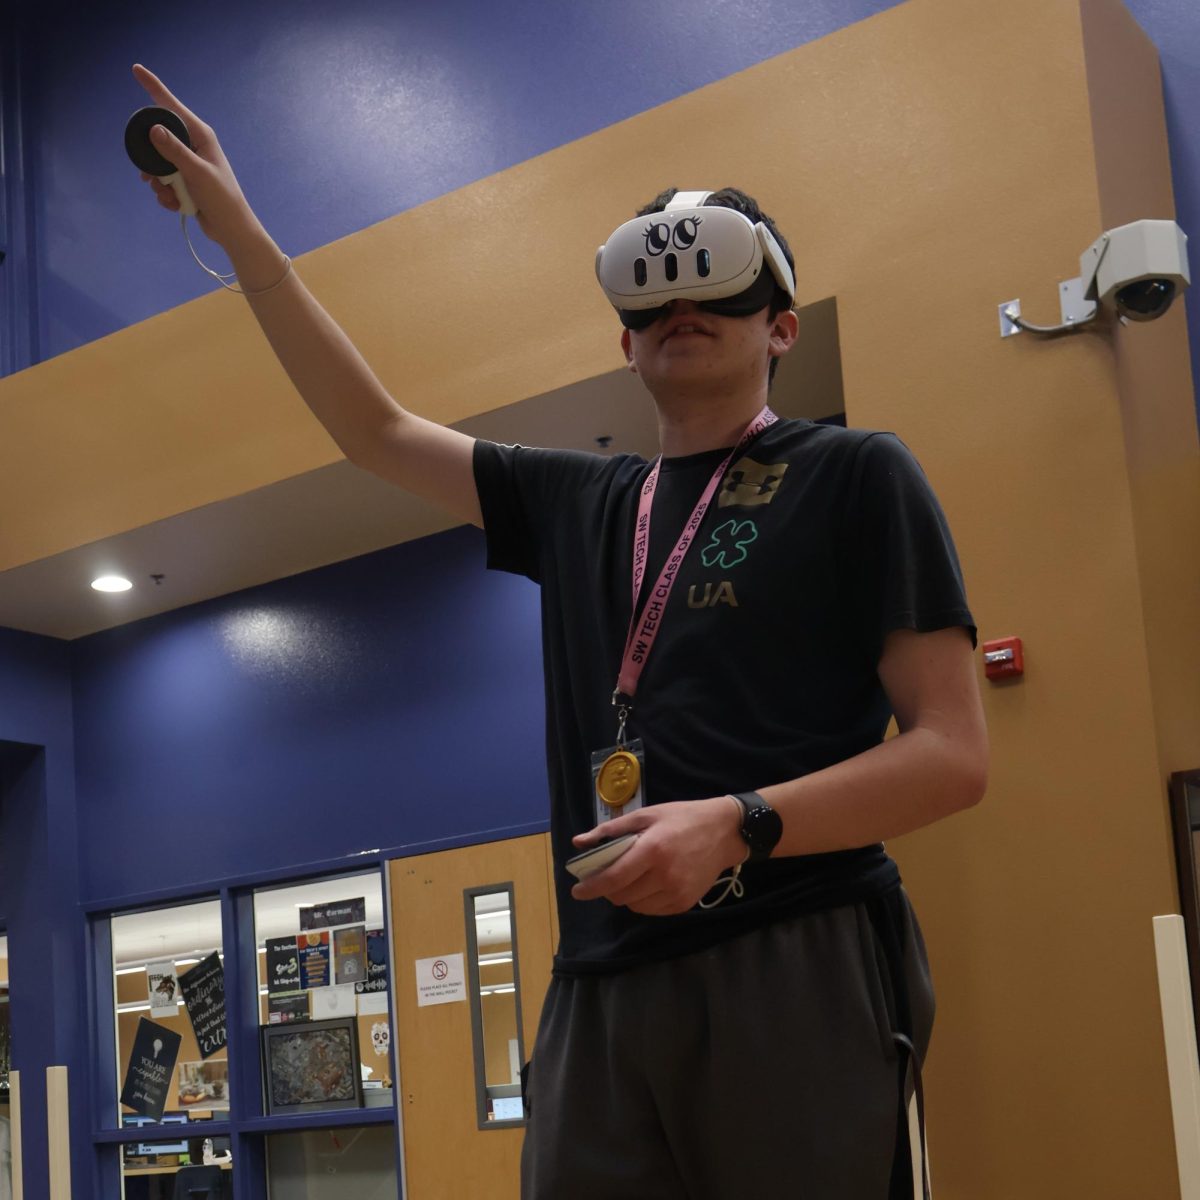 Photo+Caption%3A+Before+the+start+of+class%2C+sophomore+Connor+Wiggins+assists+in+setting+up+virtual+reality+headsets.+Students+have+been+engaging+in+VR-integrated+learning.+%E2%80%9CWe+are+working+to+integrate+projects+we%E2%80%99ve+made+with+Unity%2C+which+is+the+game+engine+that+we+use%2C%E2%80%9D+Wiggins+said.+%E2%80%9COnce+its+into+virtual+reality%2C+you+can+control+every+aspect+of+your+3D+world+as+if+it+were+really+there.%E2%80%9D+